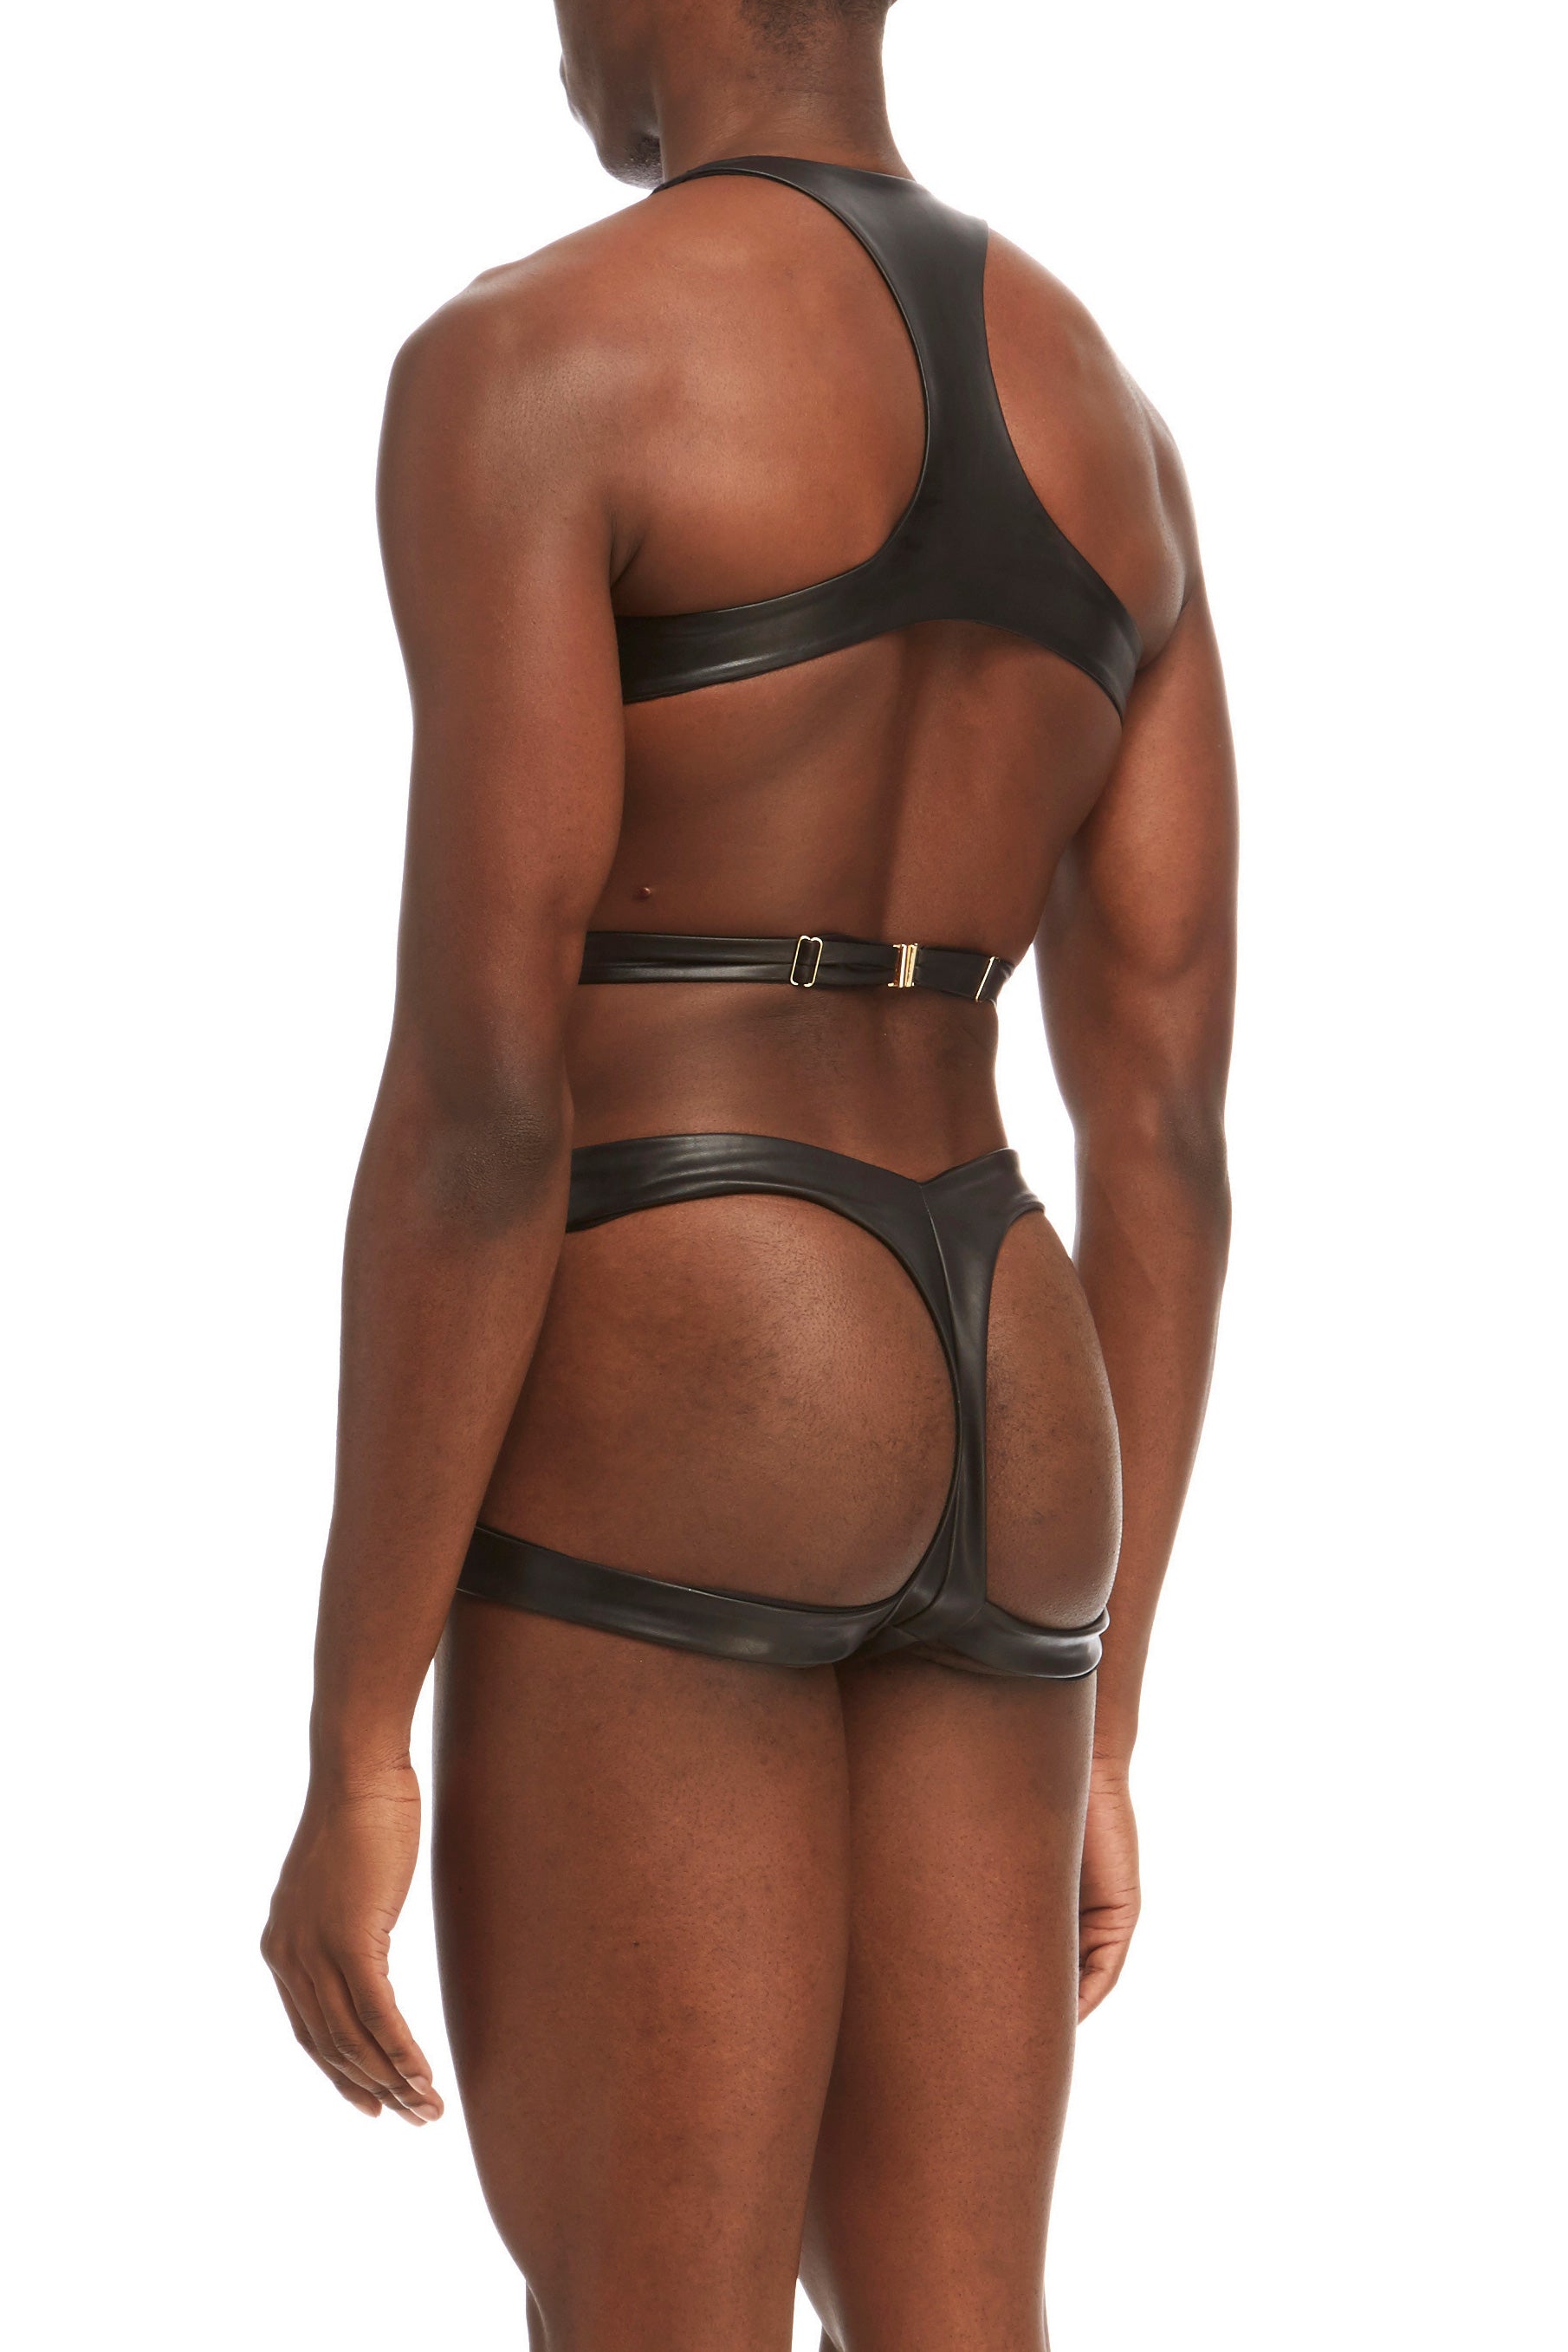 DSTM Maya mens harness and thong in vegan leather - side back